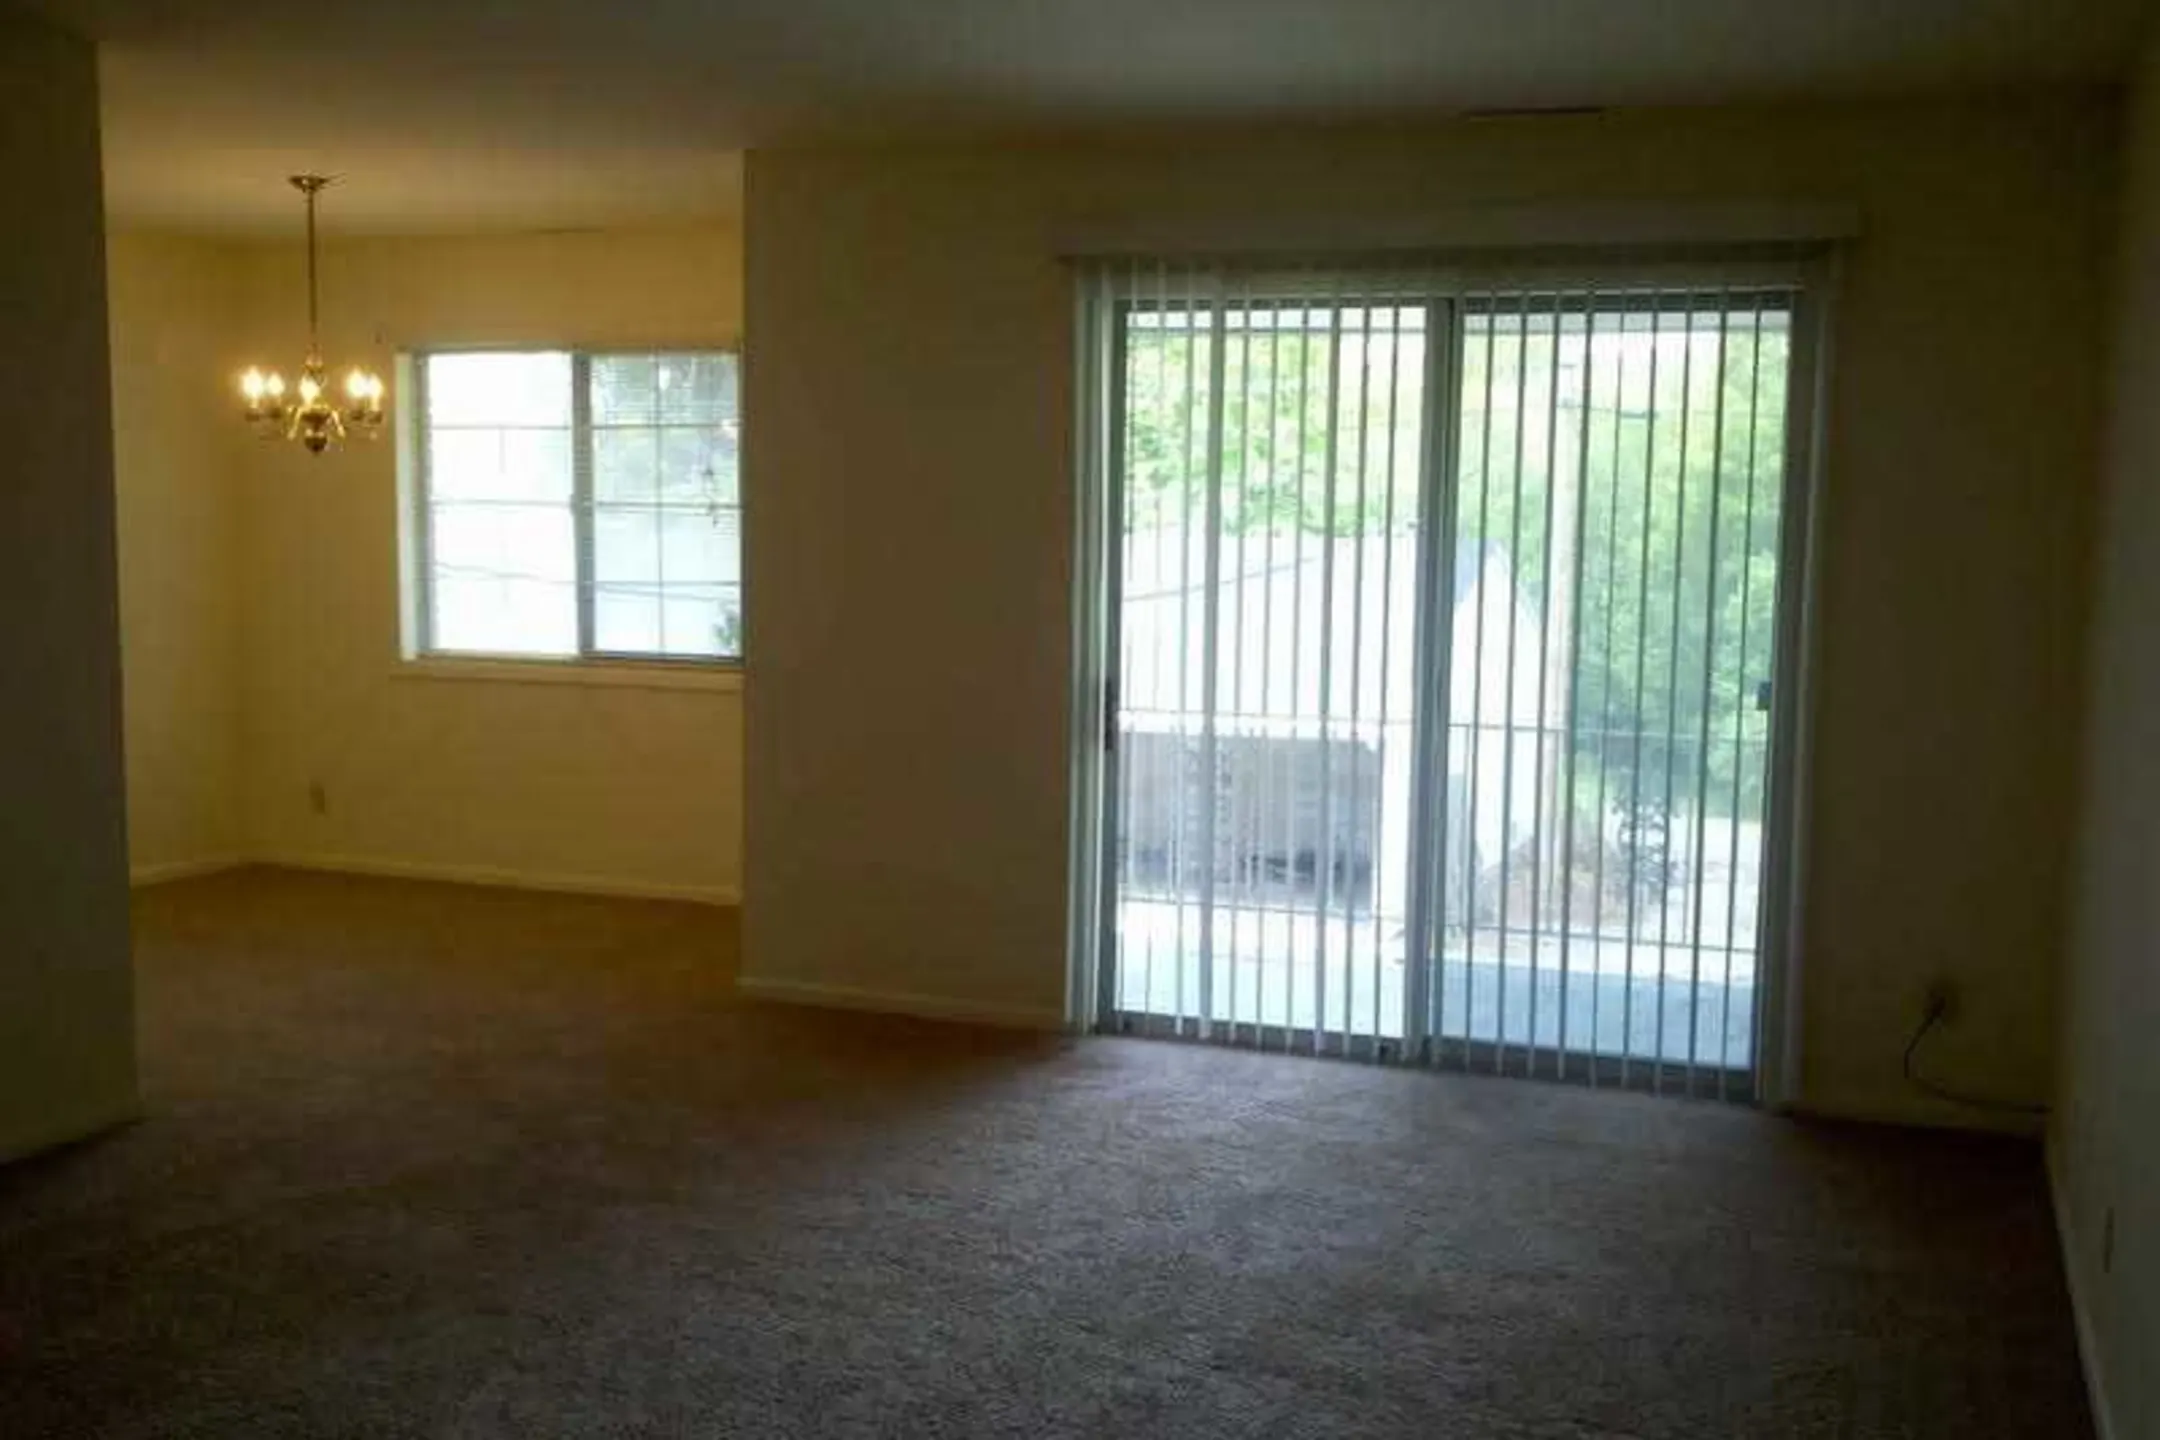 Living Room - Monticello Apartments & Townhomes - Youngstown, OH